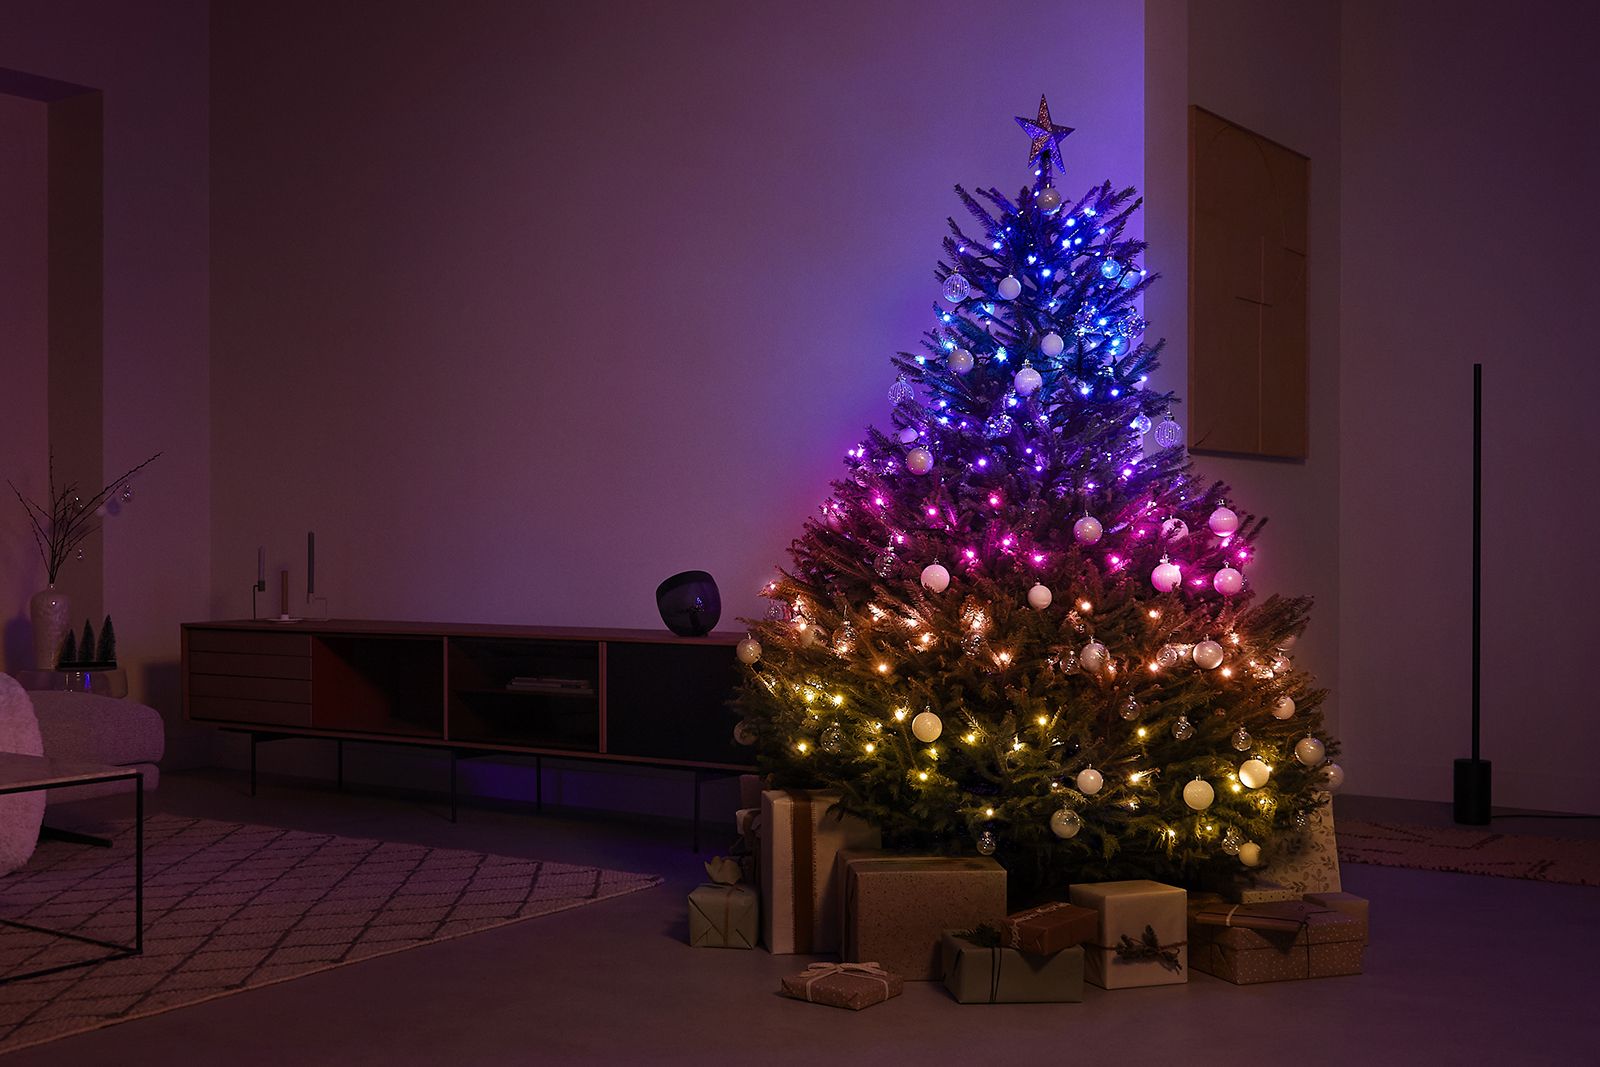 Philips Hue Festavia string lights can smarten up your Christmas tree photo 1